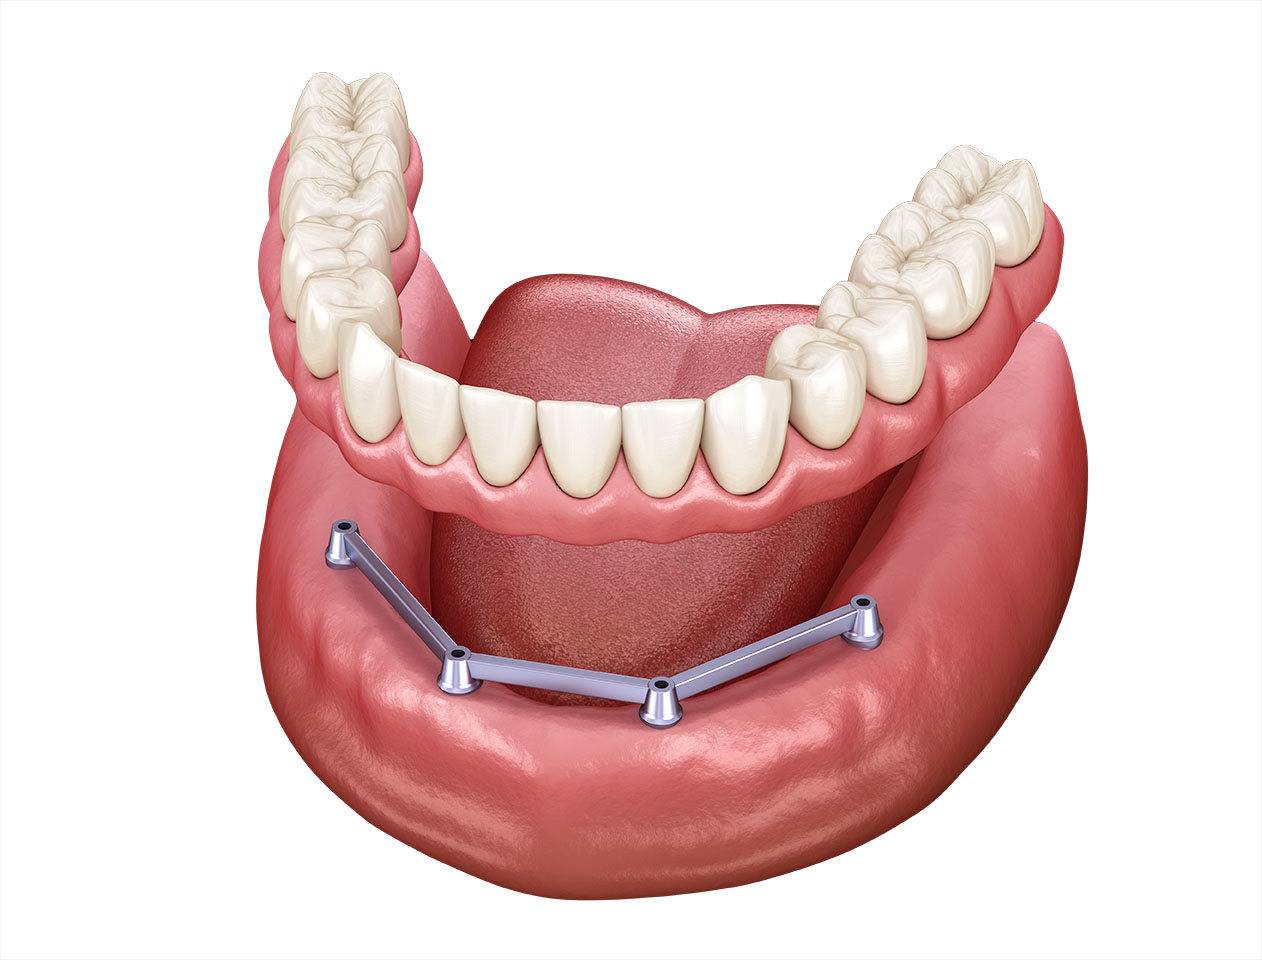 Removable Mandibular prosthesis with gum All on 4 system supported by implants. Medically accurate 3D illustration of human teeth and dentures